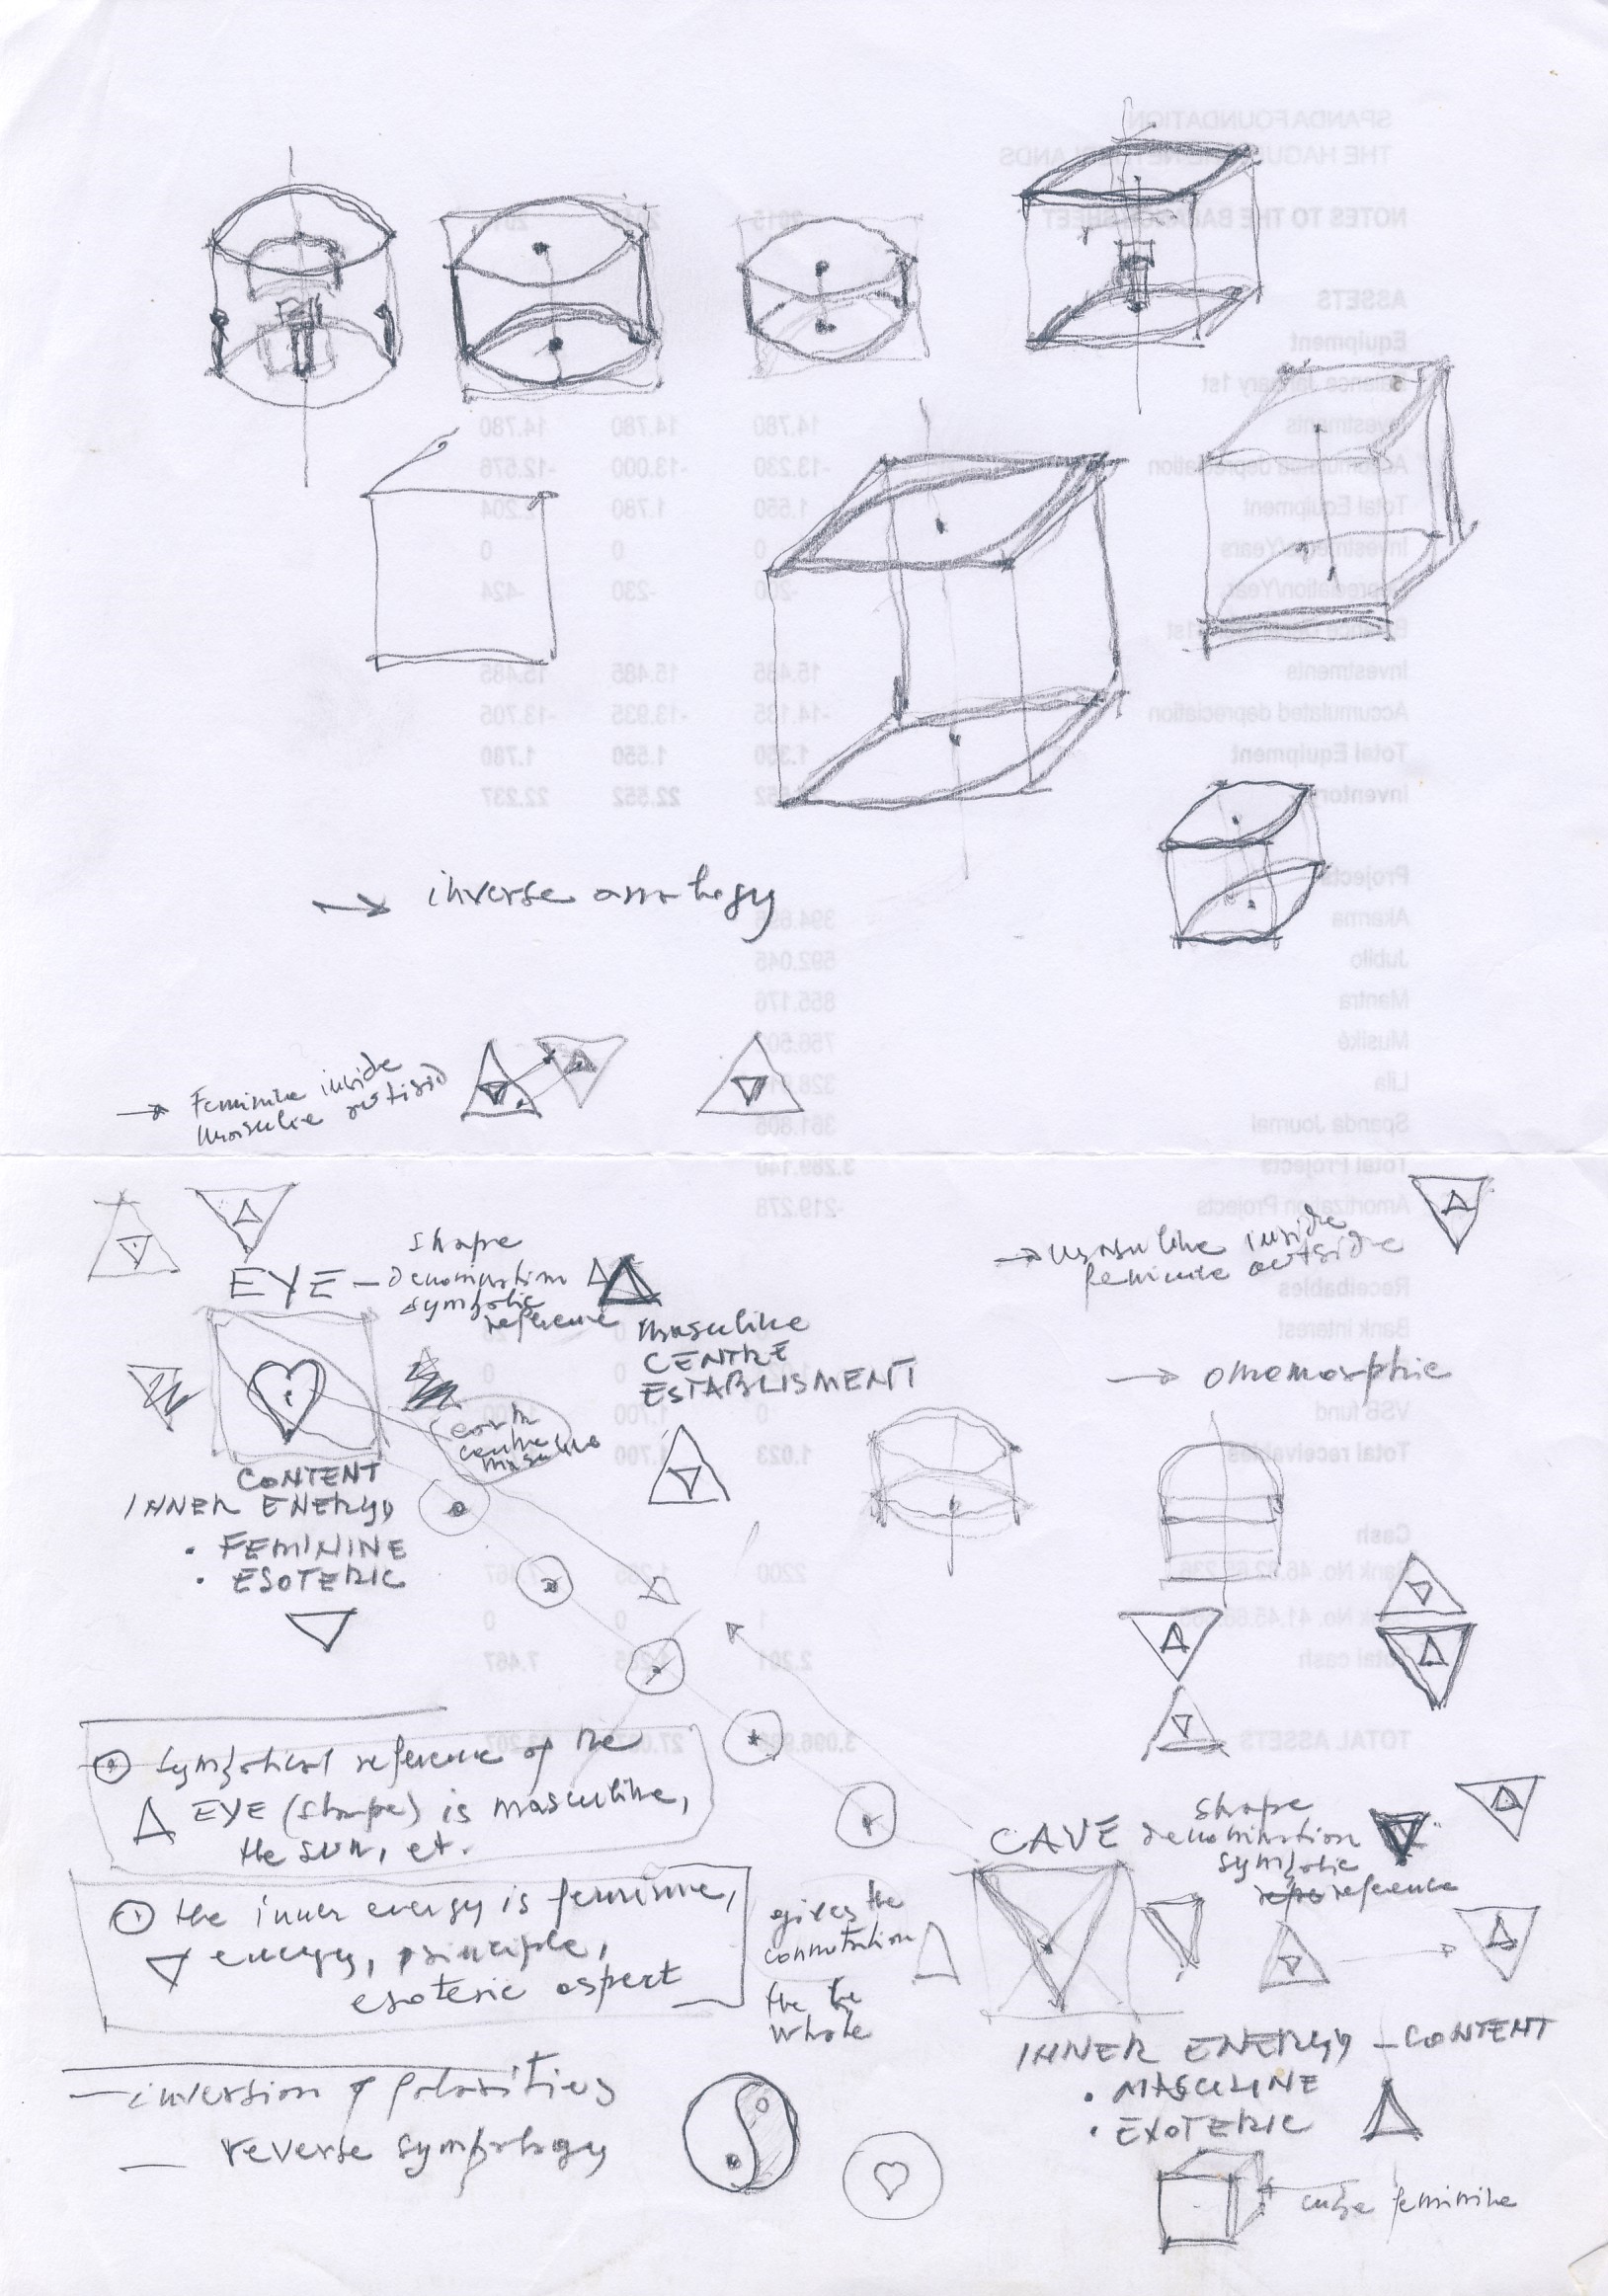 Conceptual sketch for shaping the Eye in the cube; inversion of polarities, 2019. Pencil on paper, 29.7 x 21 cm.